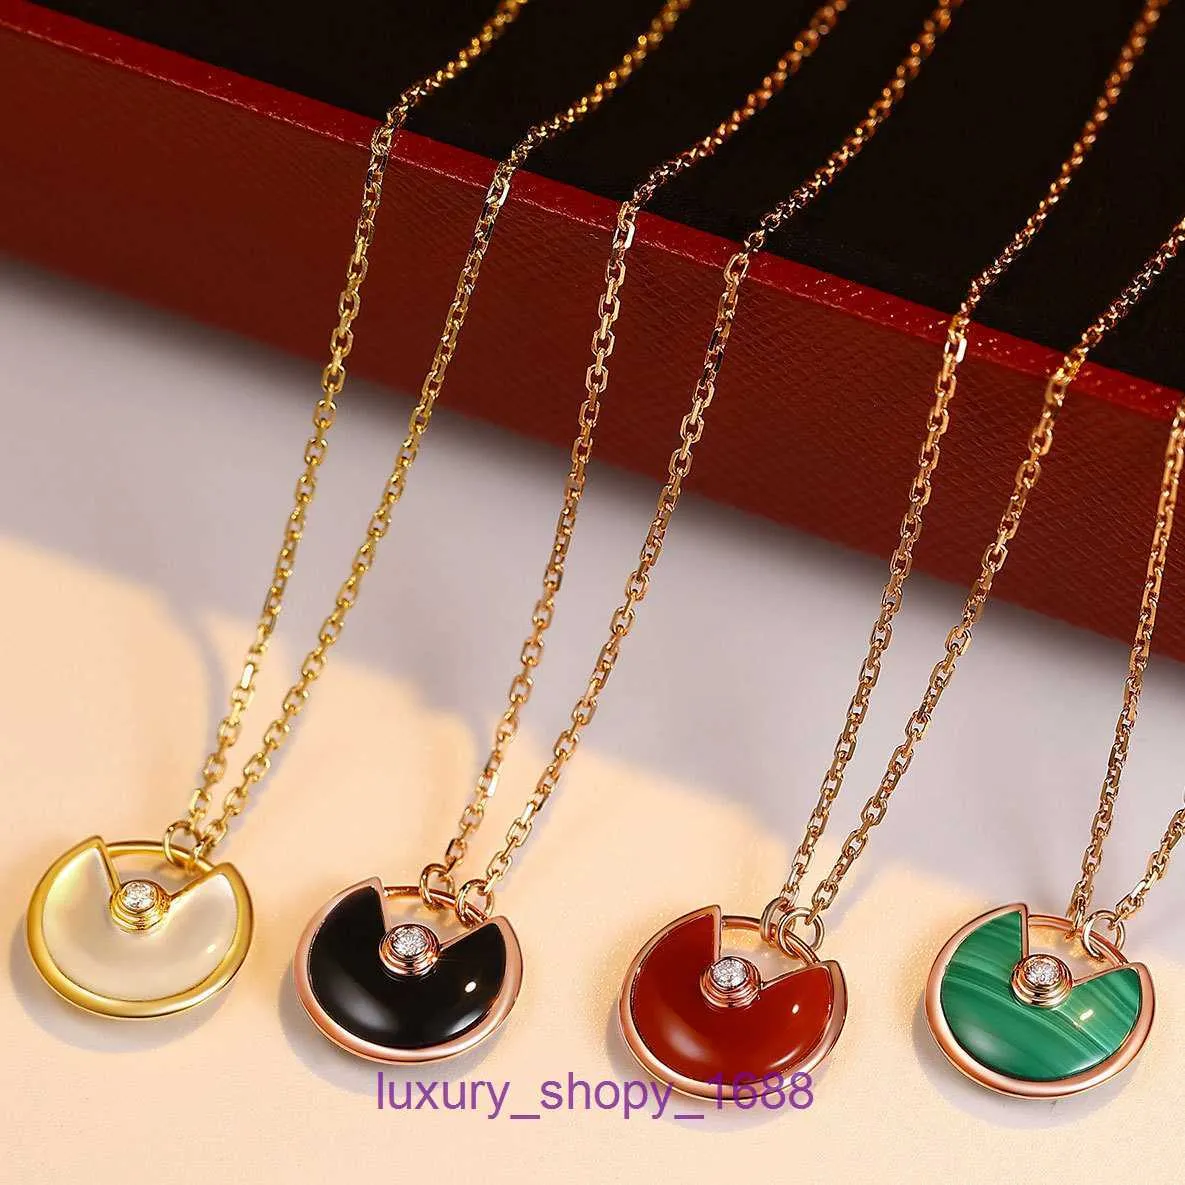 Top Quality Car tires's necklace For women online store 18k gold plated amulet for inlaid with white Fritillaria red and black agate circular With Original Box